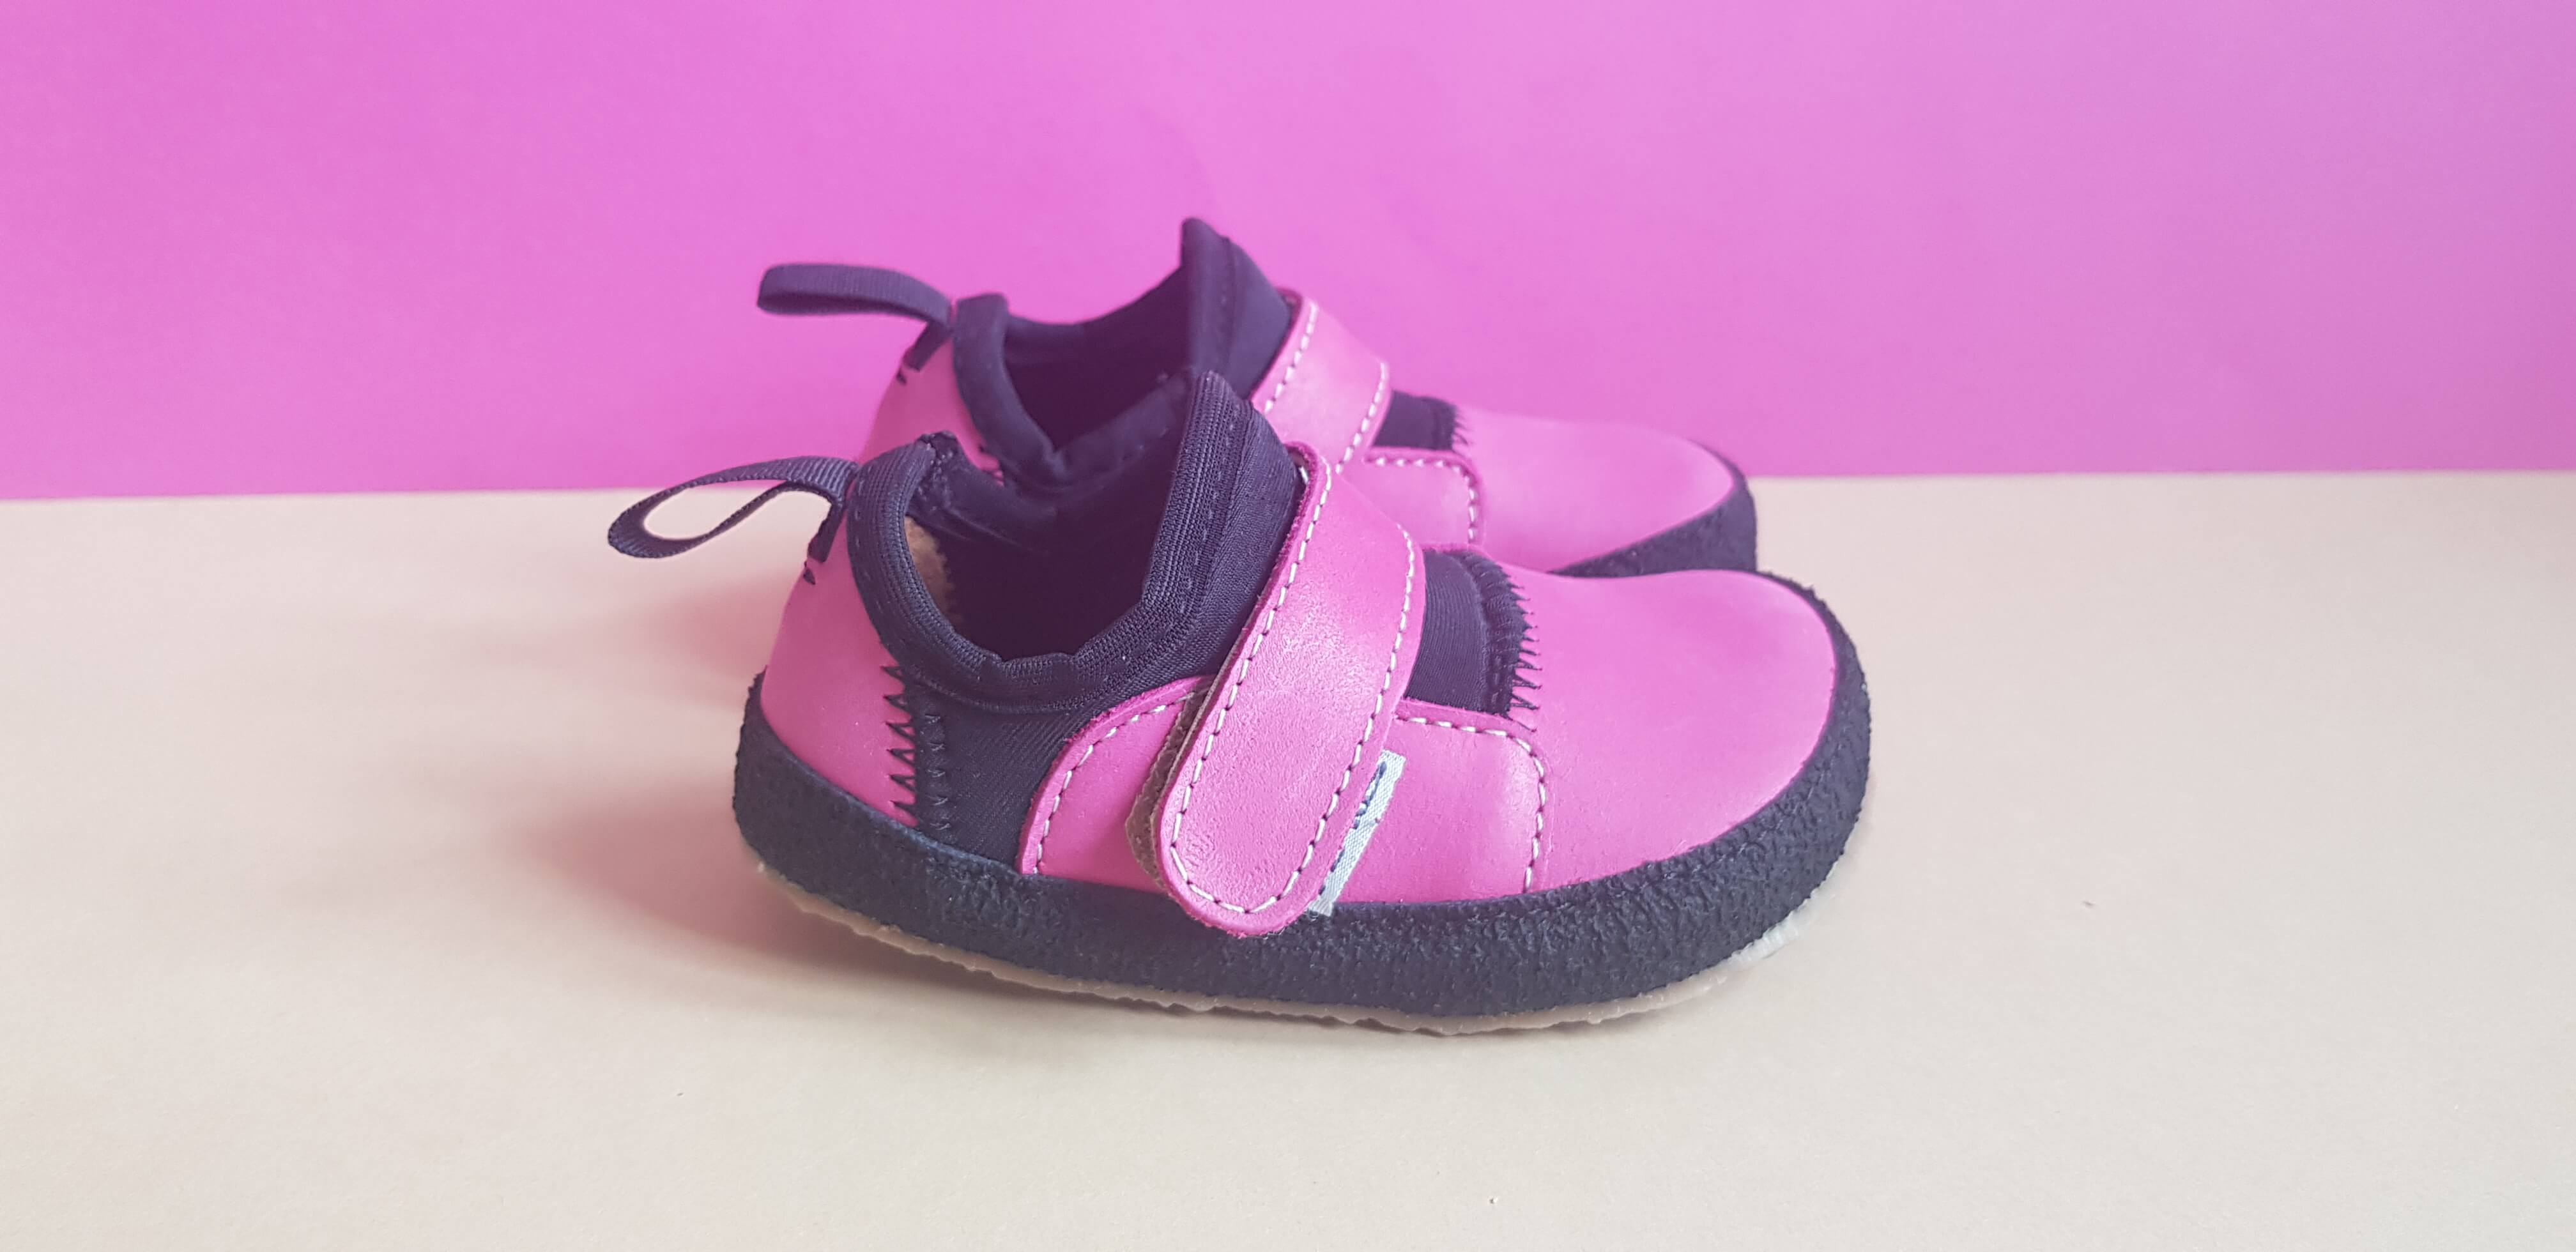 Barefoot Anatomically Shaped First Shoes - Pink and Black